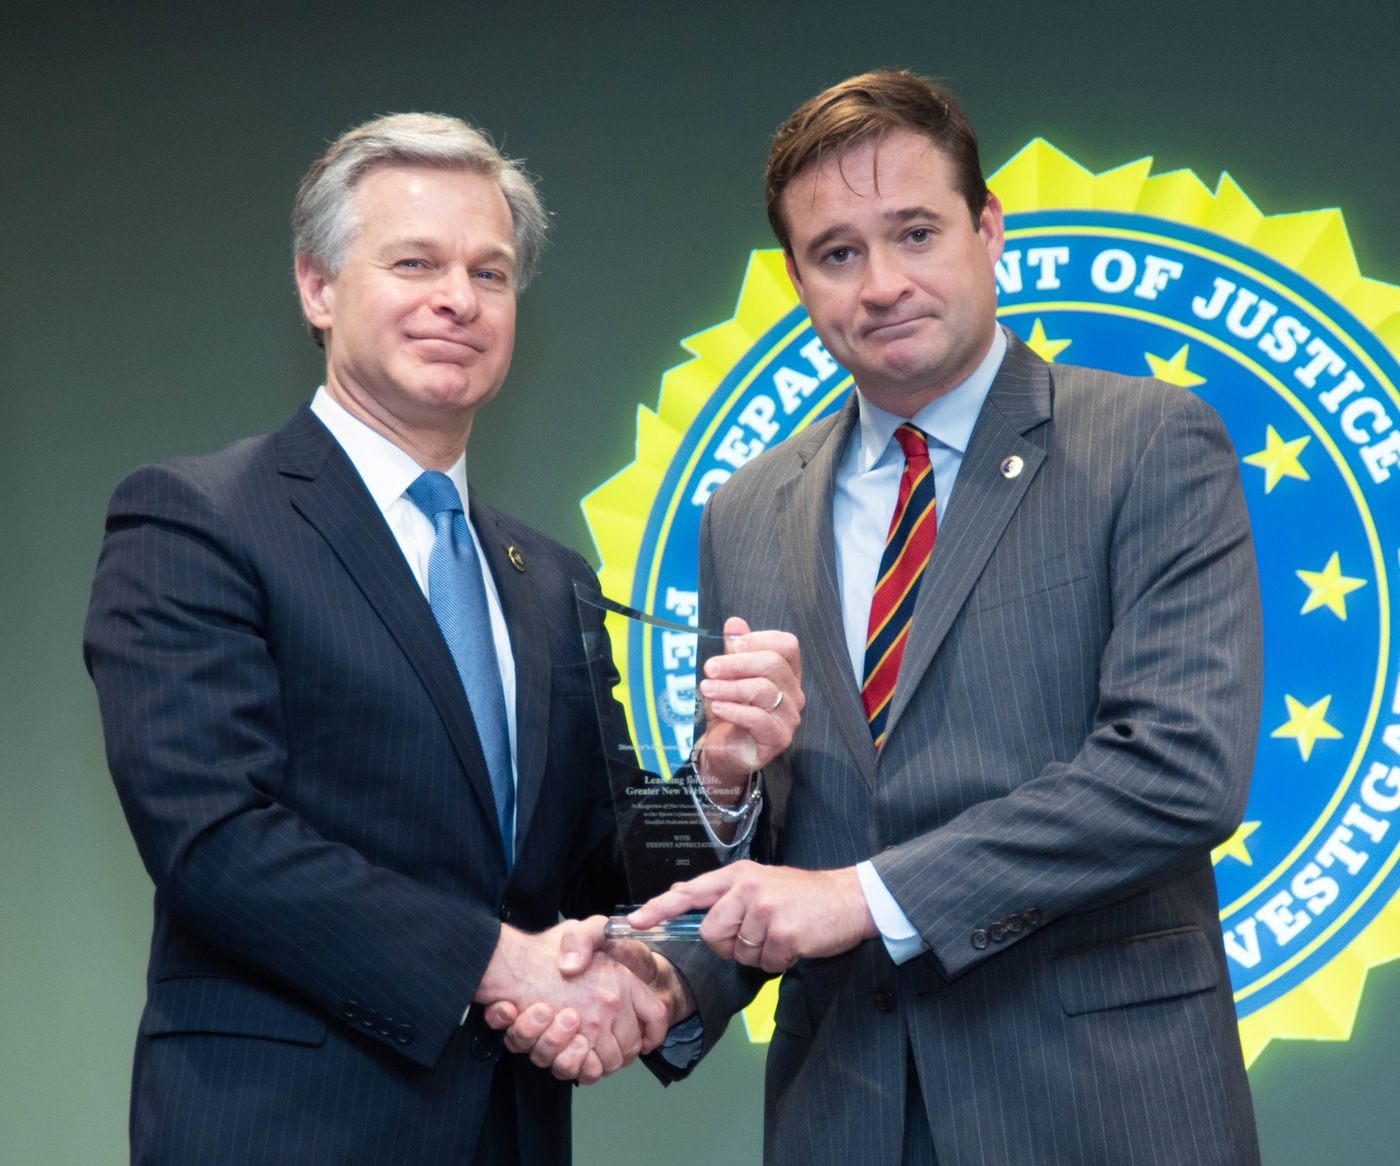 FBI New York 2022 Director’s Community Leadership Award recipient Learning for Life, Greater New York Council, represented by Travis Smith.